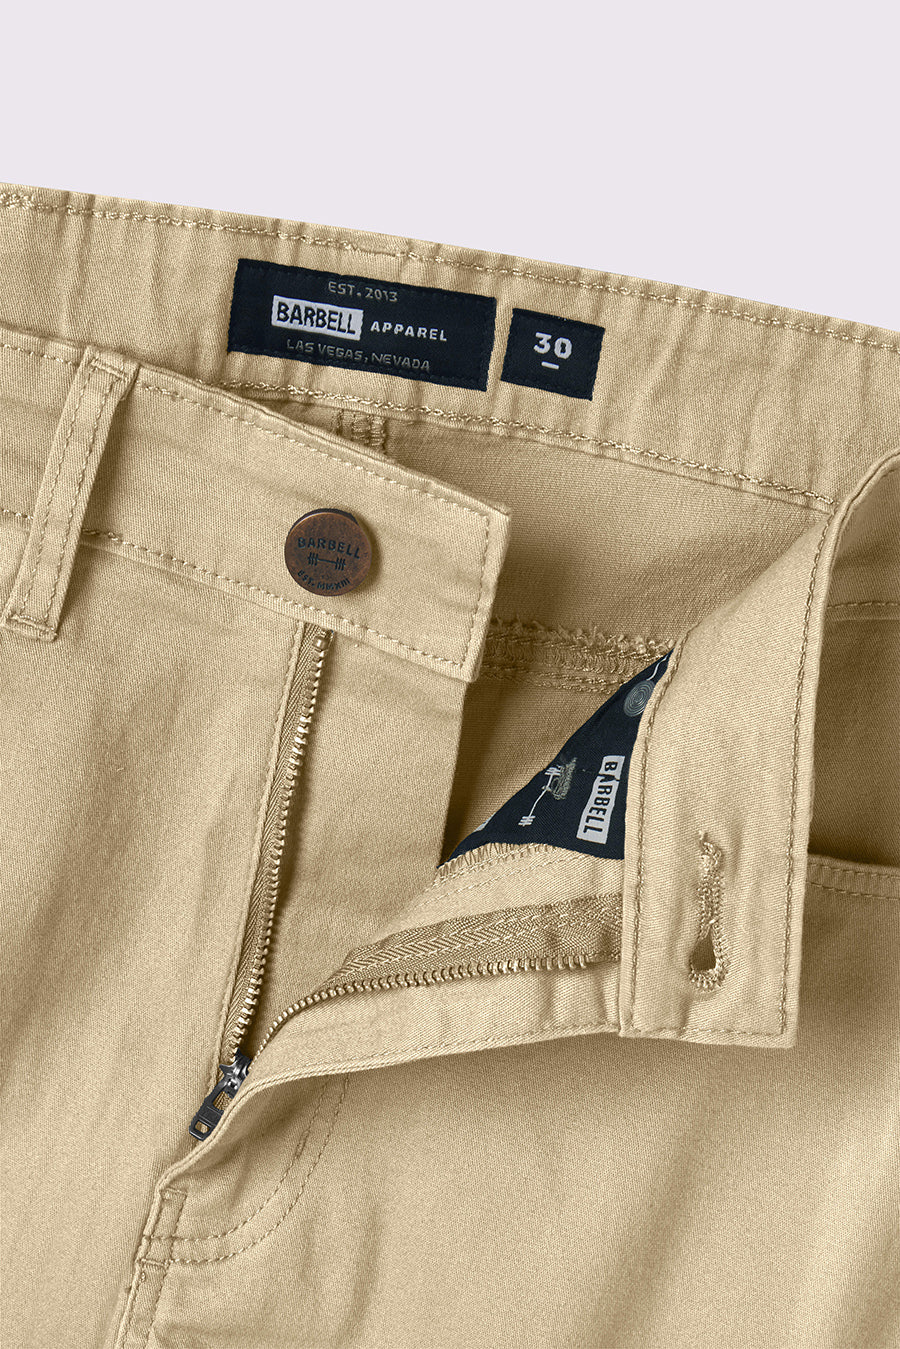 Athletic Fit Chino Pant 2.0 - Khaki - photo from button detail #color_khaki